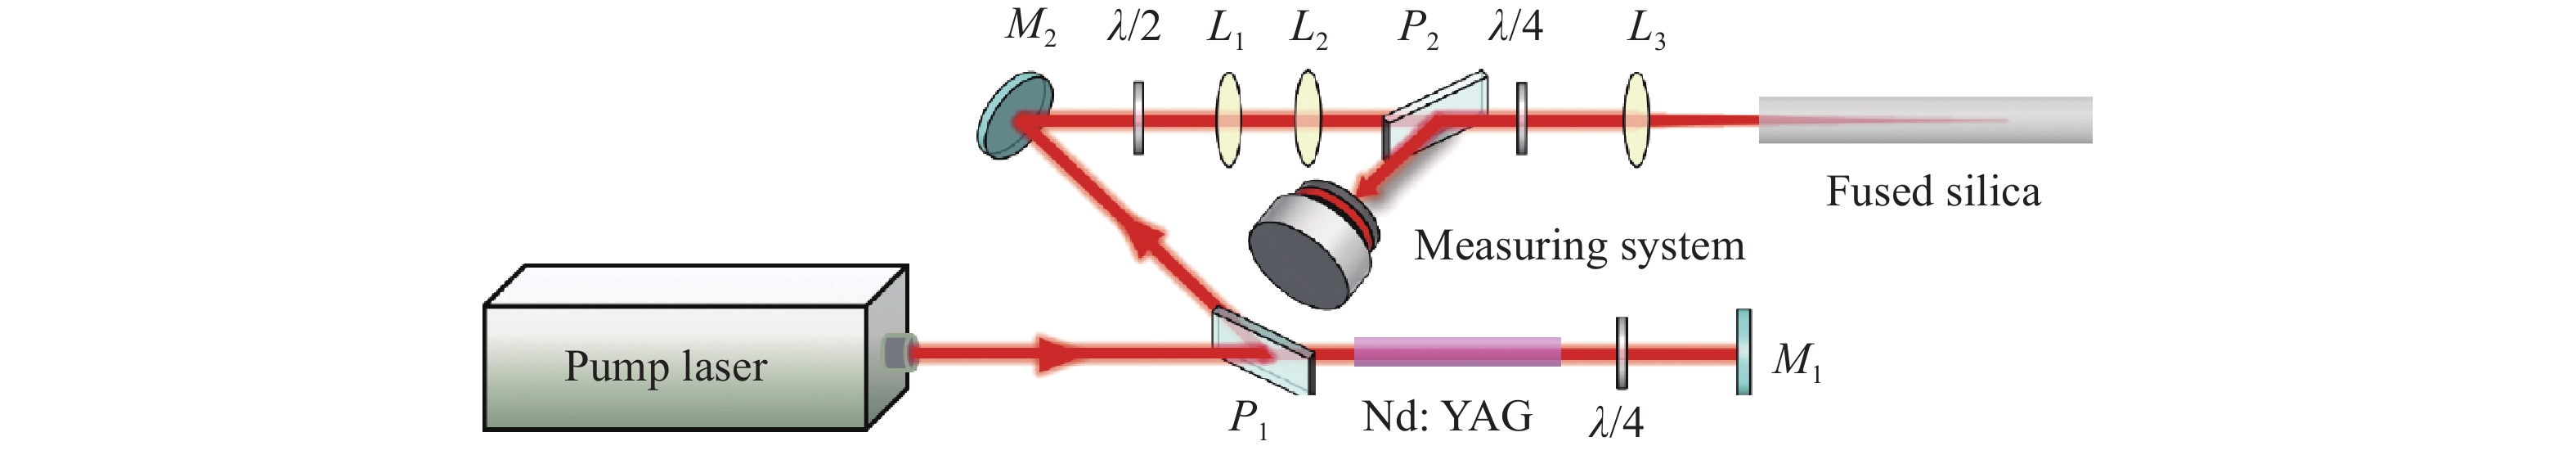 (a) Diagram of SBS experimental device using fused silica (P1-P2: Polarizer; M1-M2: Mirror; λ/4: Quarter-wave plate; λ/2: Half-wave plate;L1-L3: Lens)